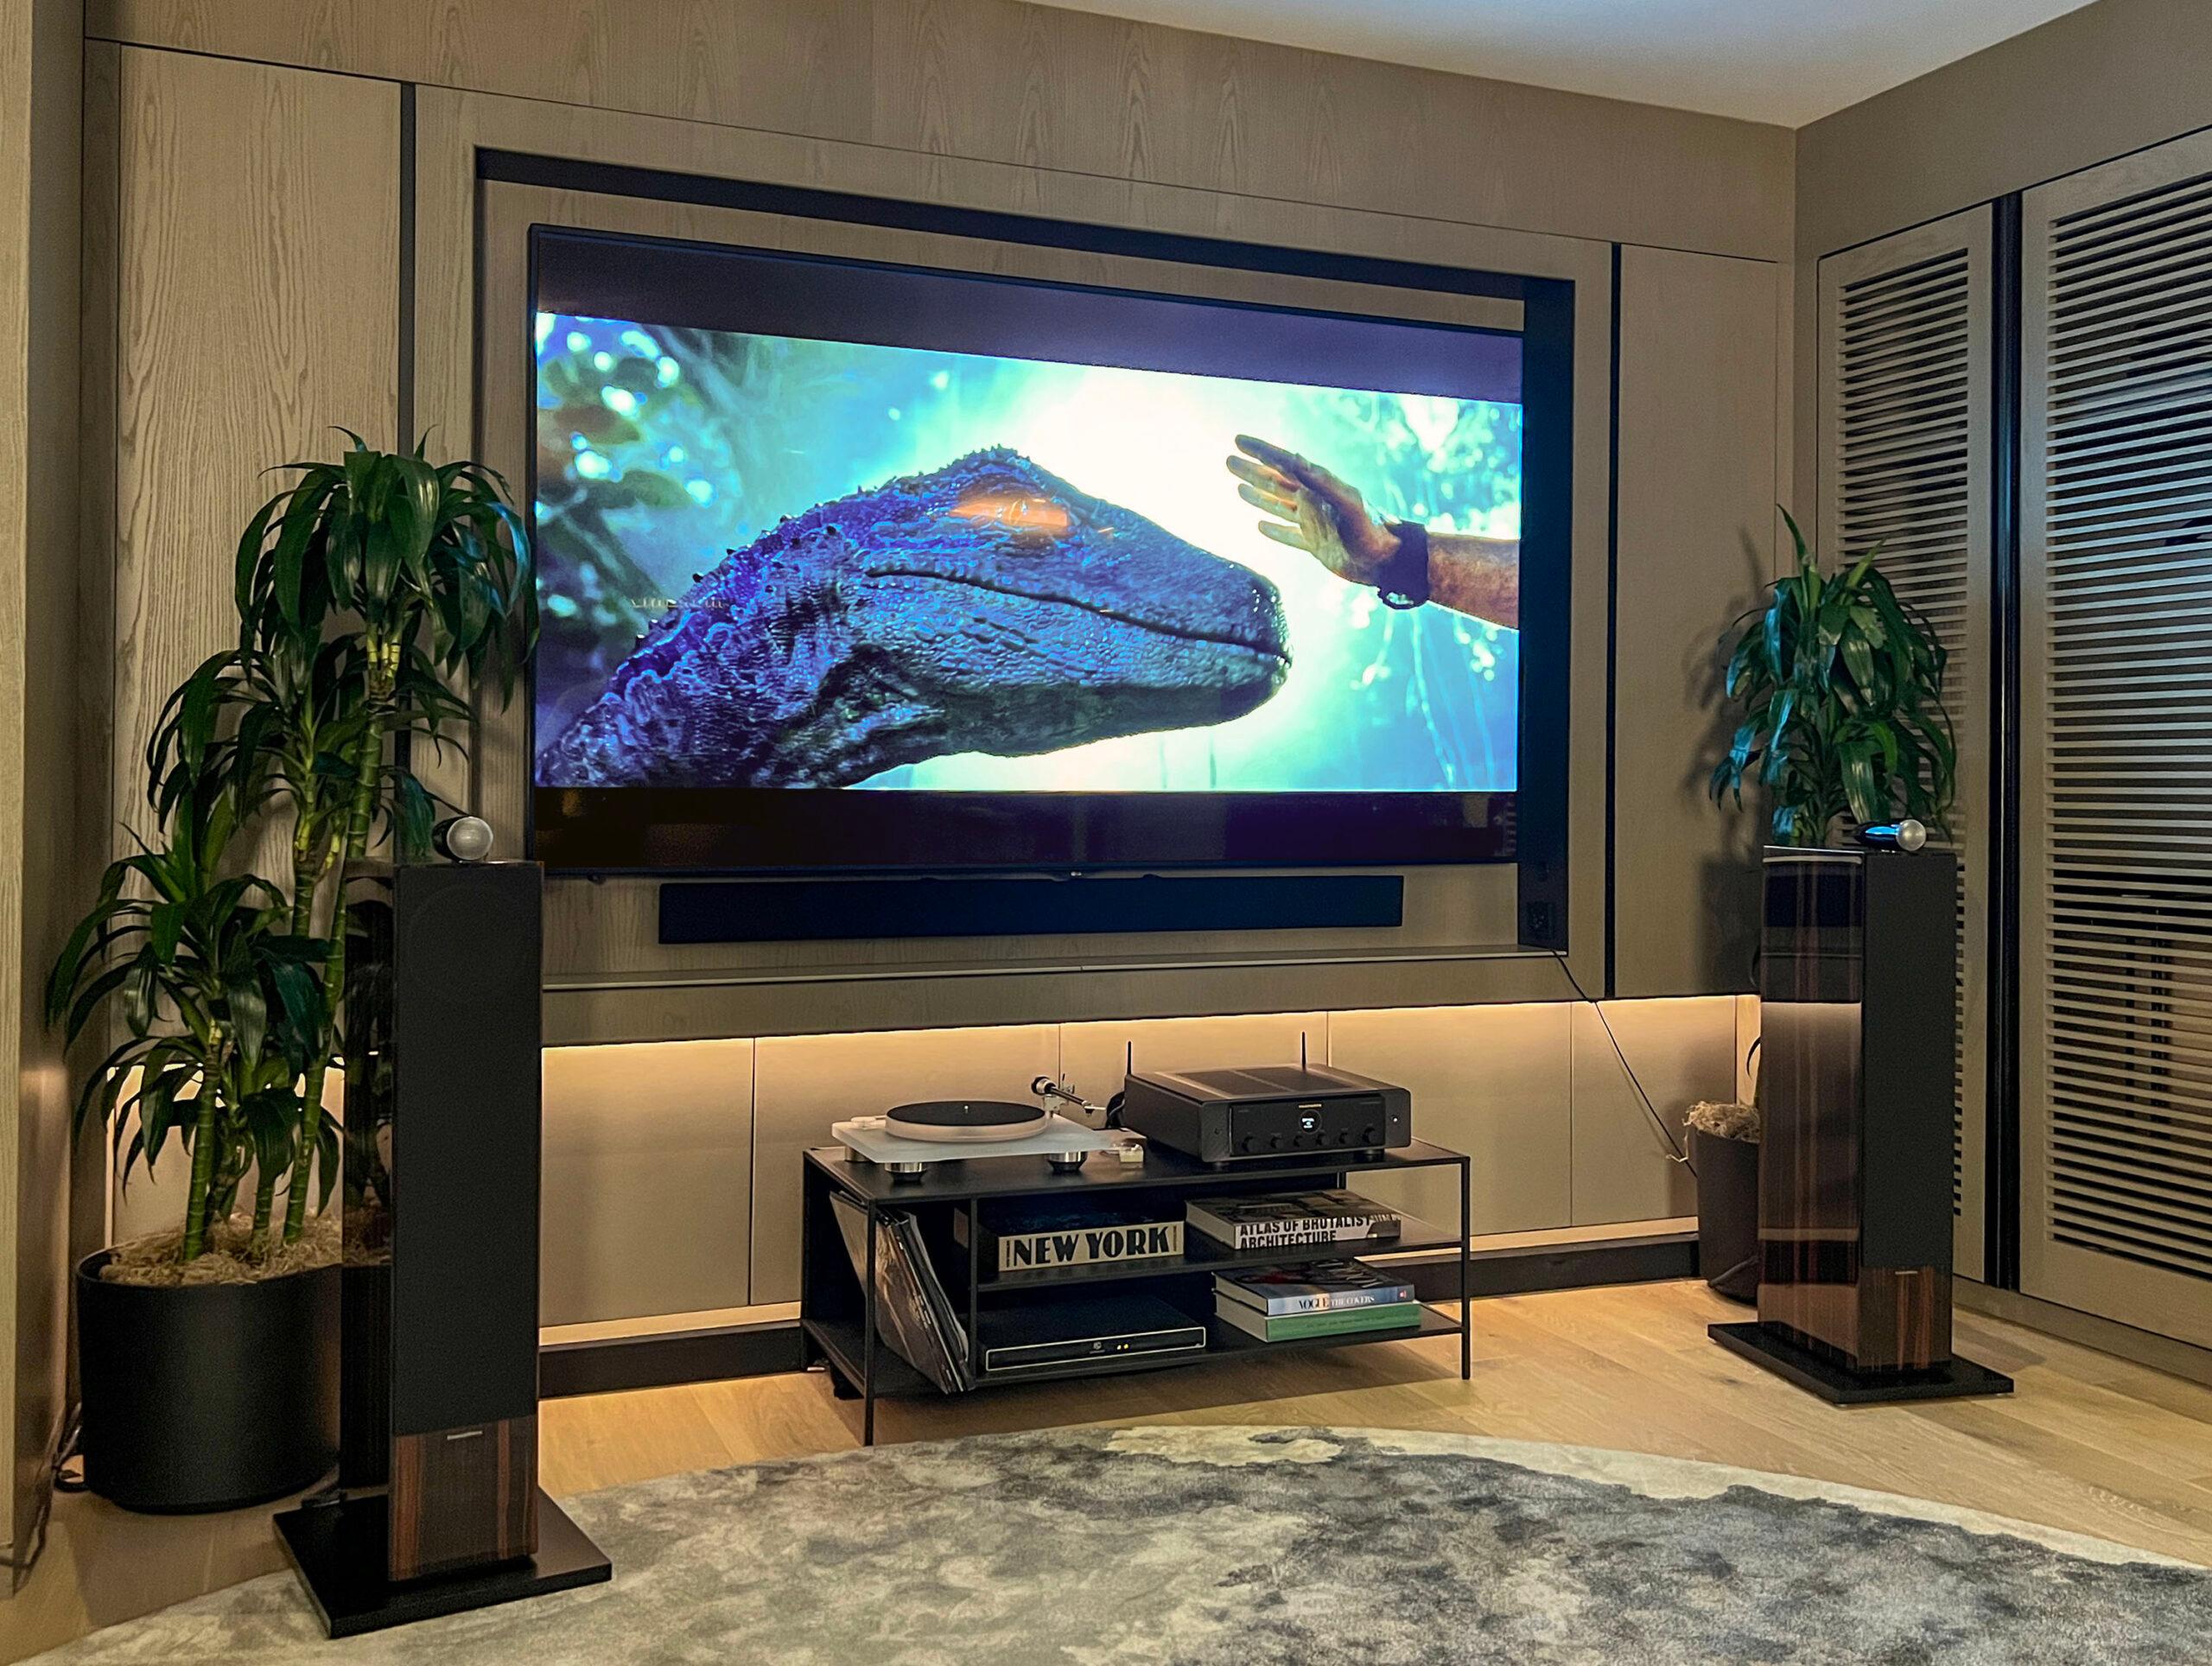 We are living in the "your living room is a home theater" era f5e87ff1 dinosaur eye scaled